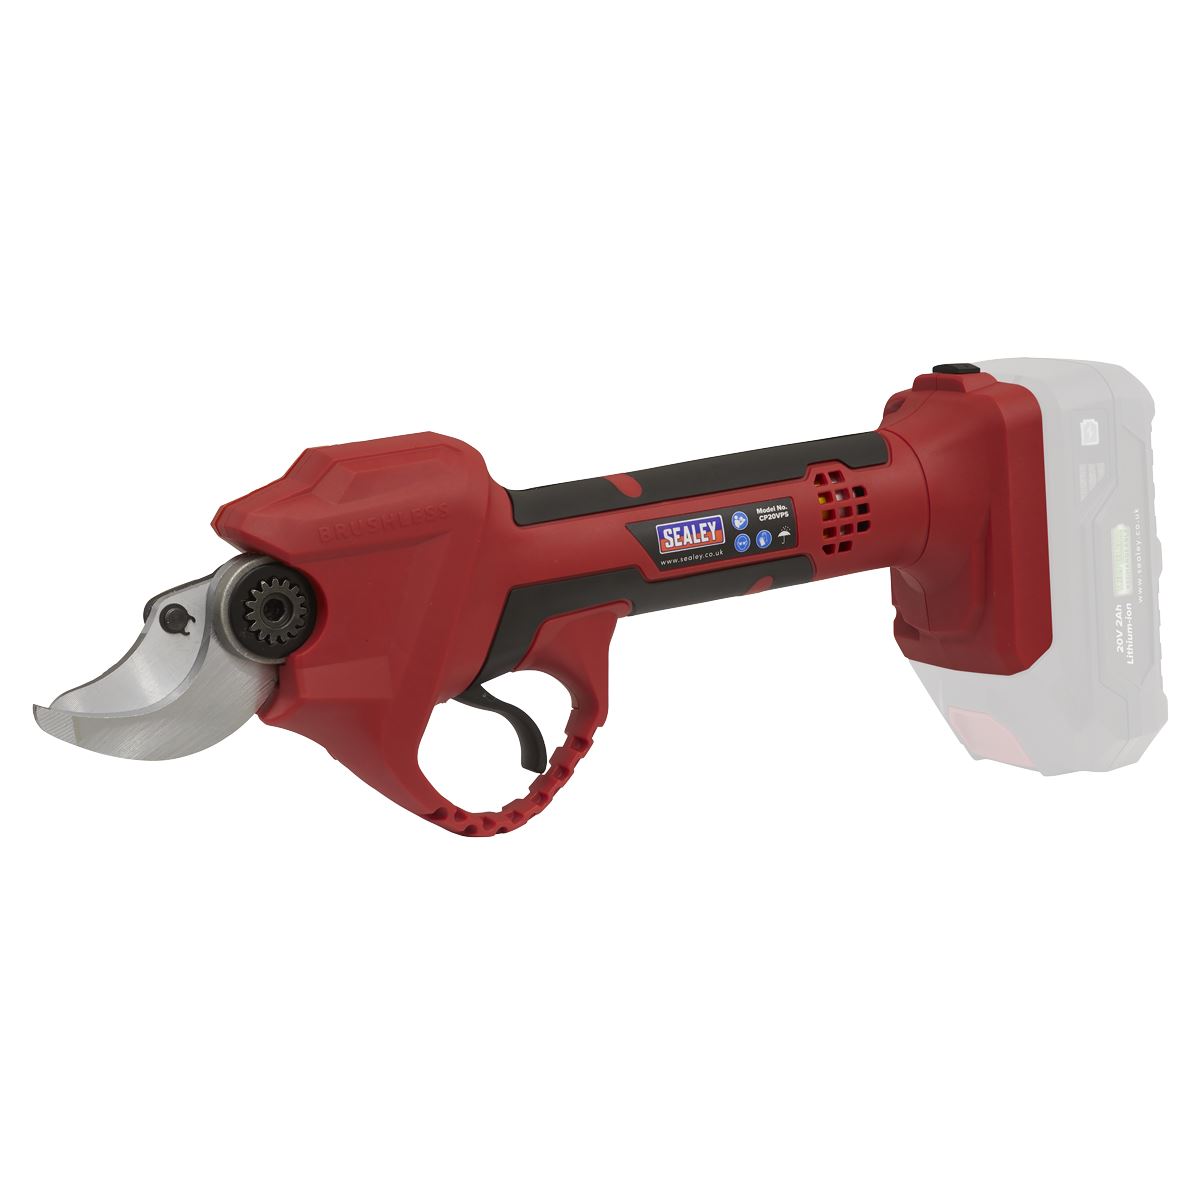 Sealey Pruning Shears Cordless 20V SV20 Series - Body Only